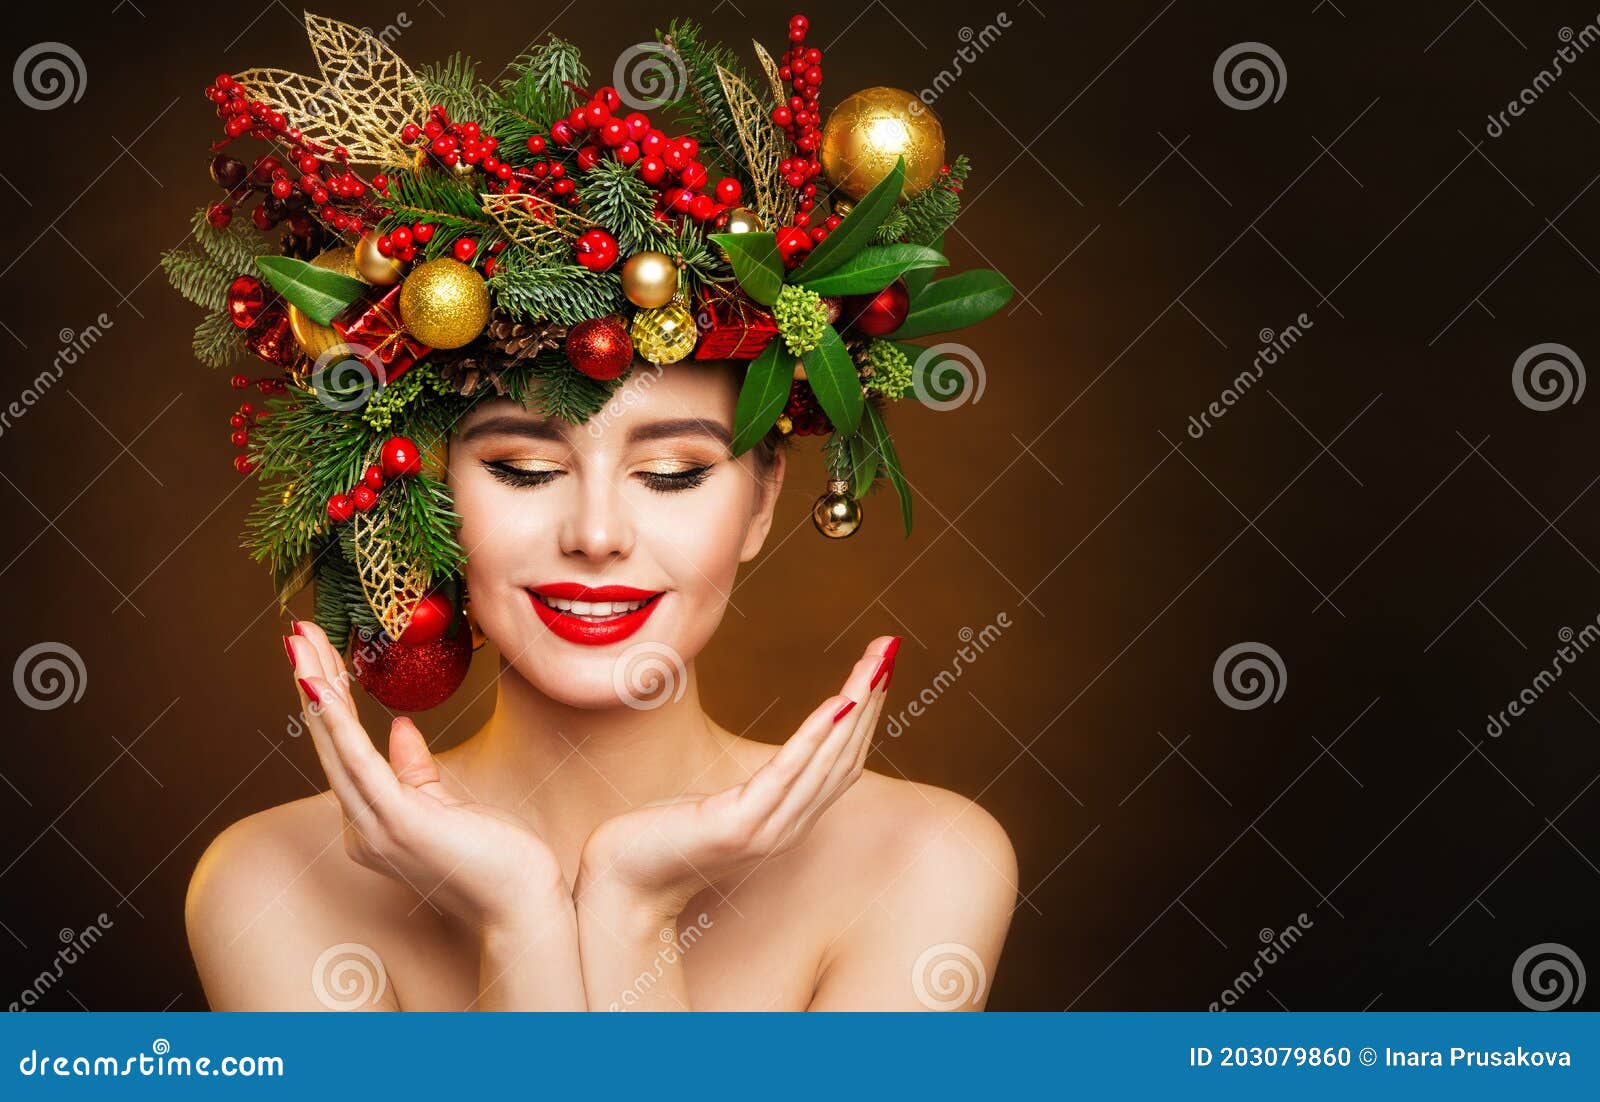 Christmas Face and Hand Skin Care. Xmas and New Year Holiday Make-up and Hair  Style. Girl Looking To Product on Open Hand Stock Photo - Image of charm,  attractive: 203079860